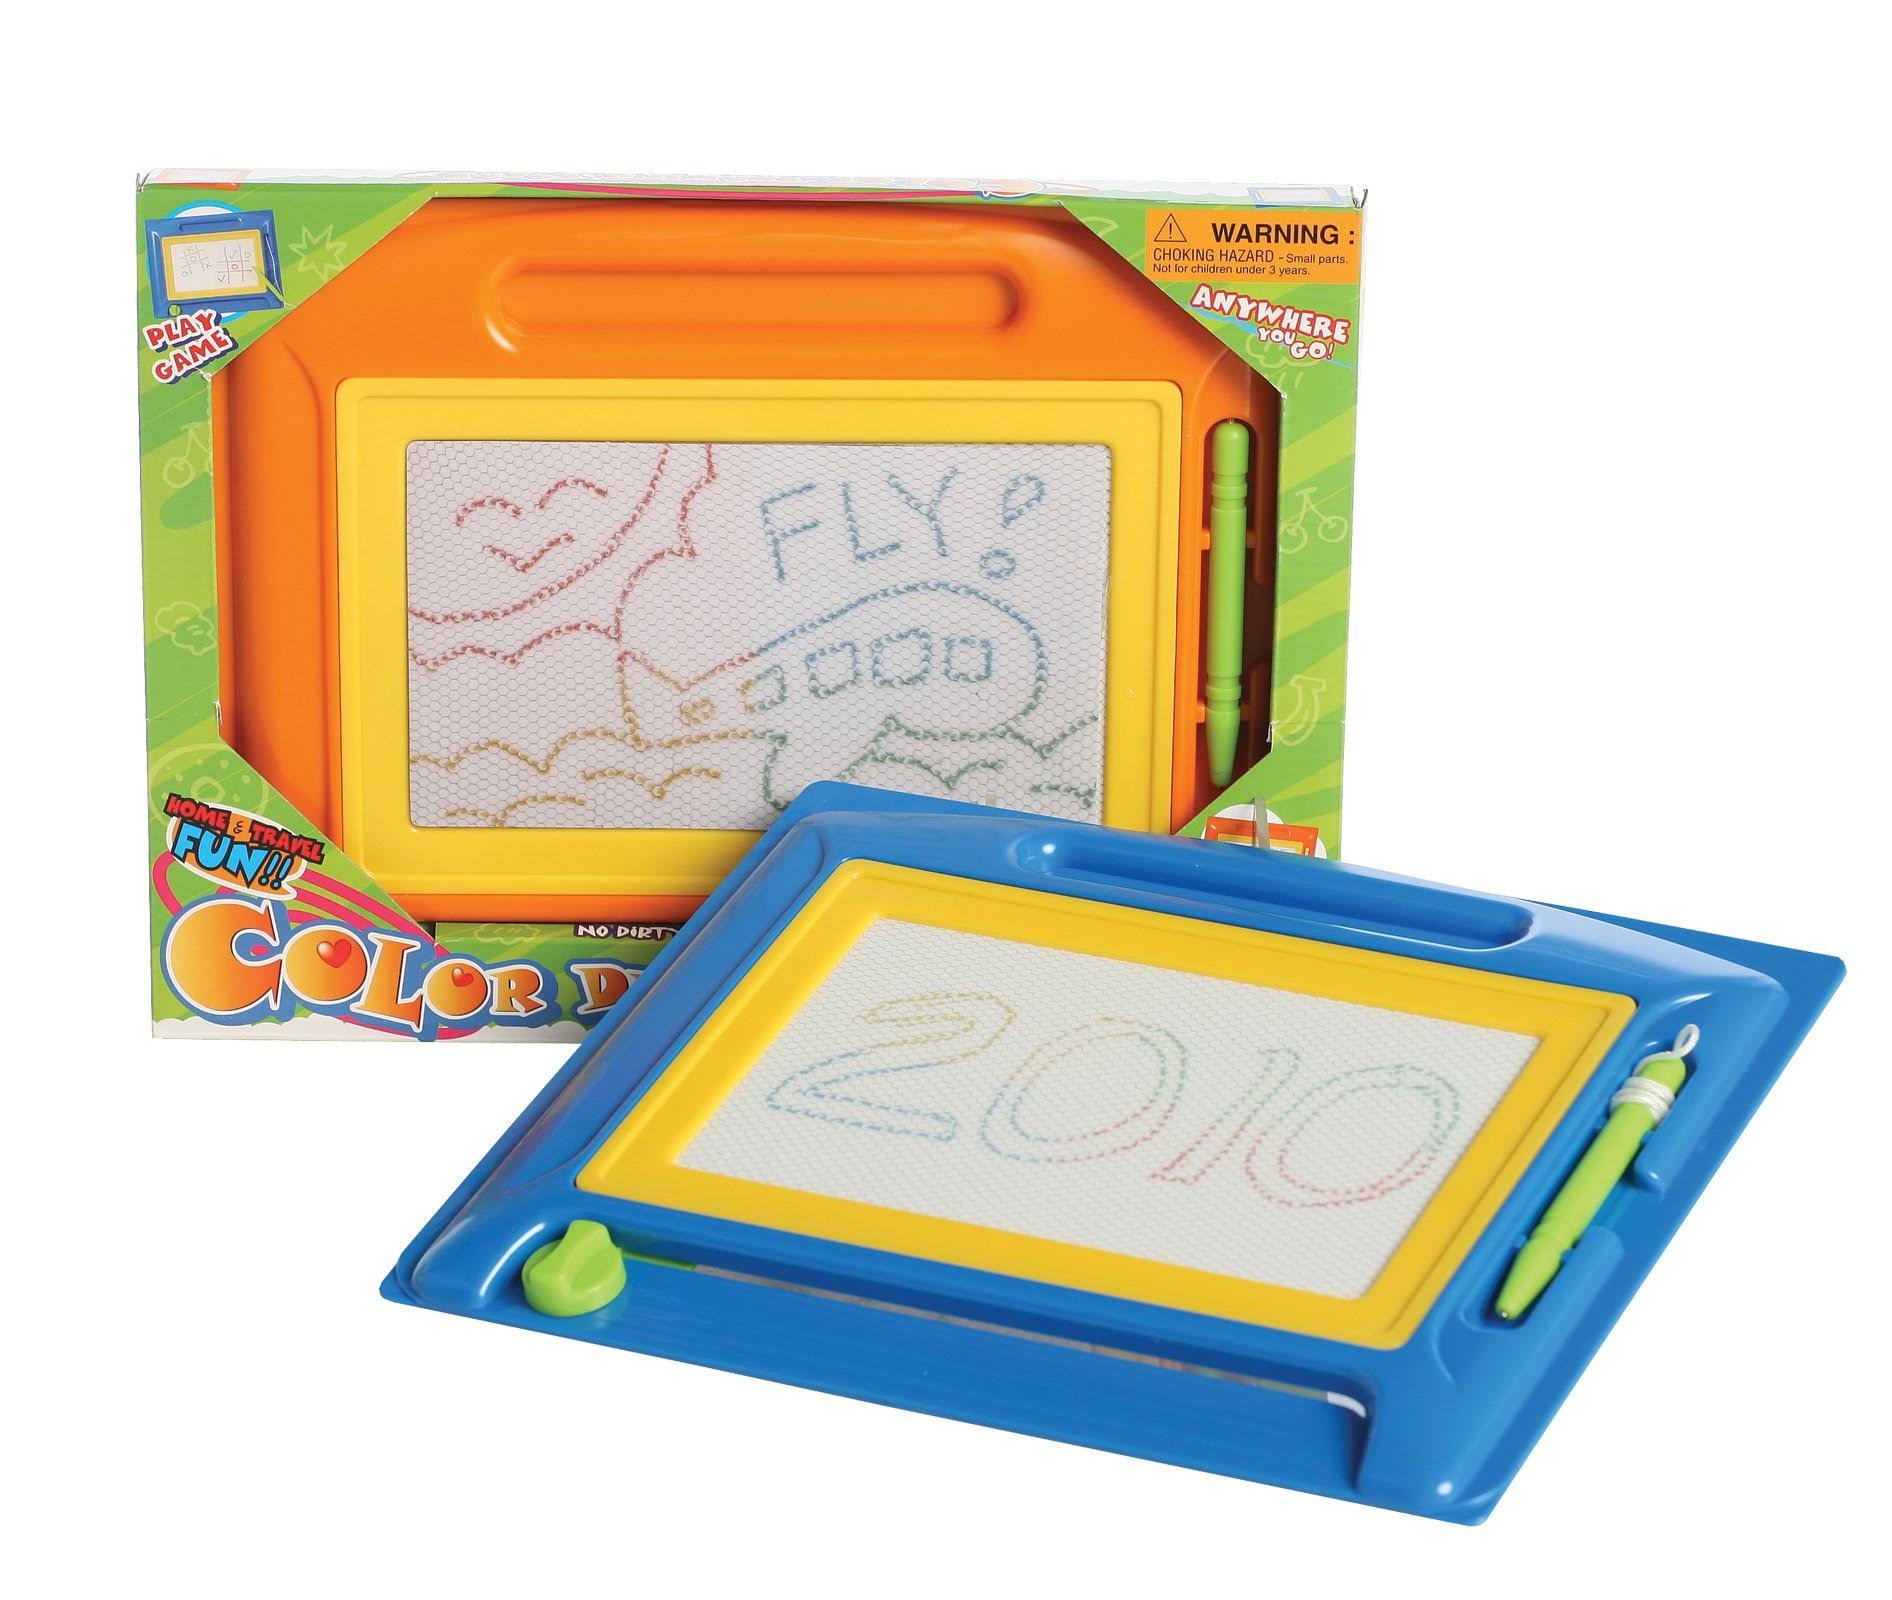 Castle Toys Color Magic Drawing Board